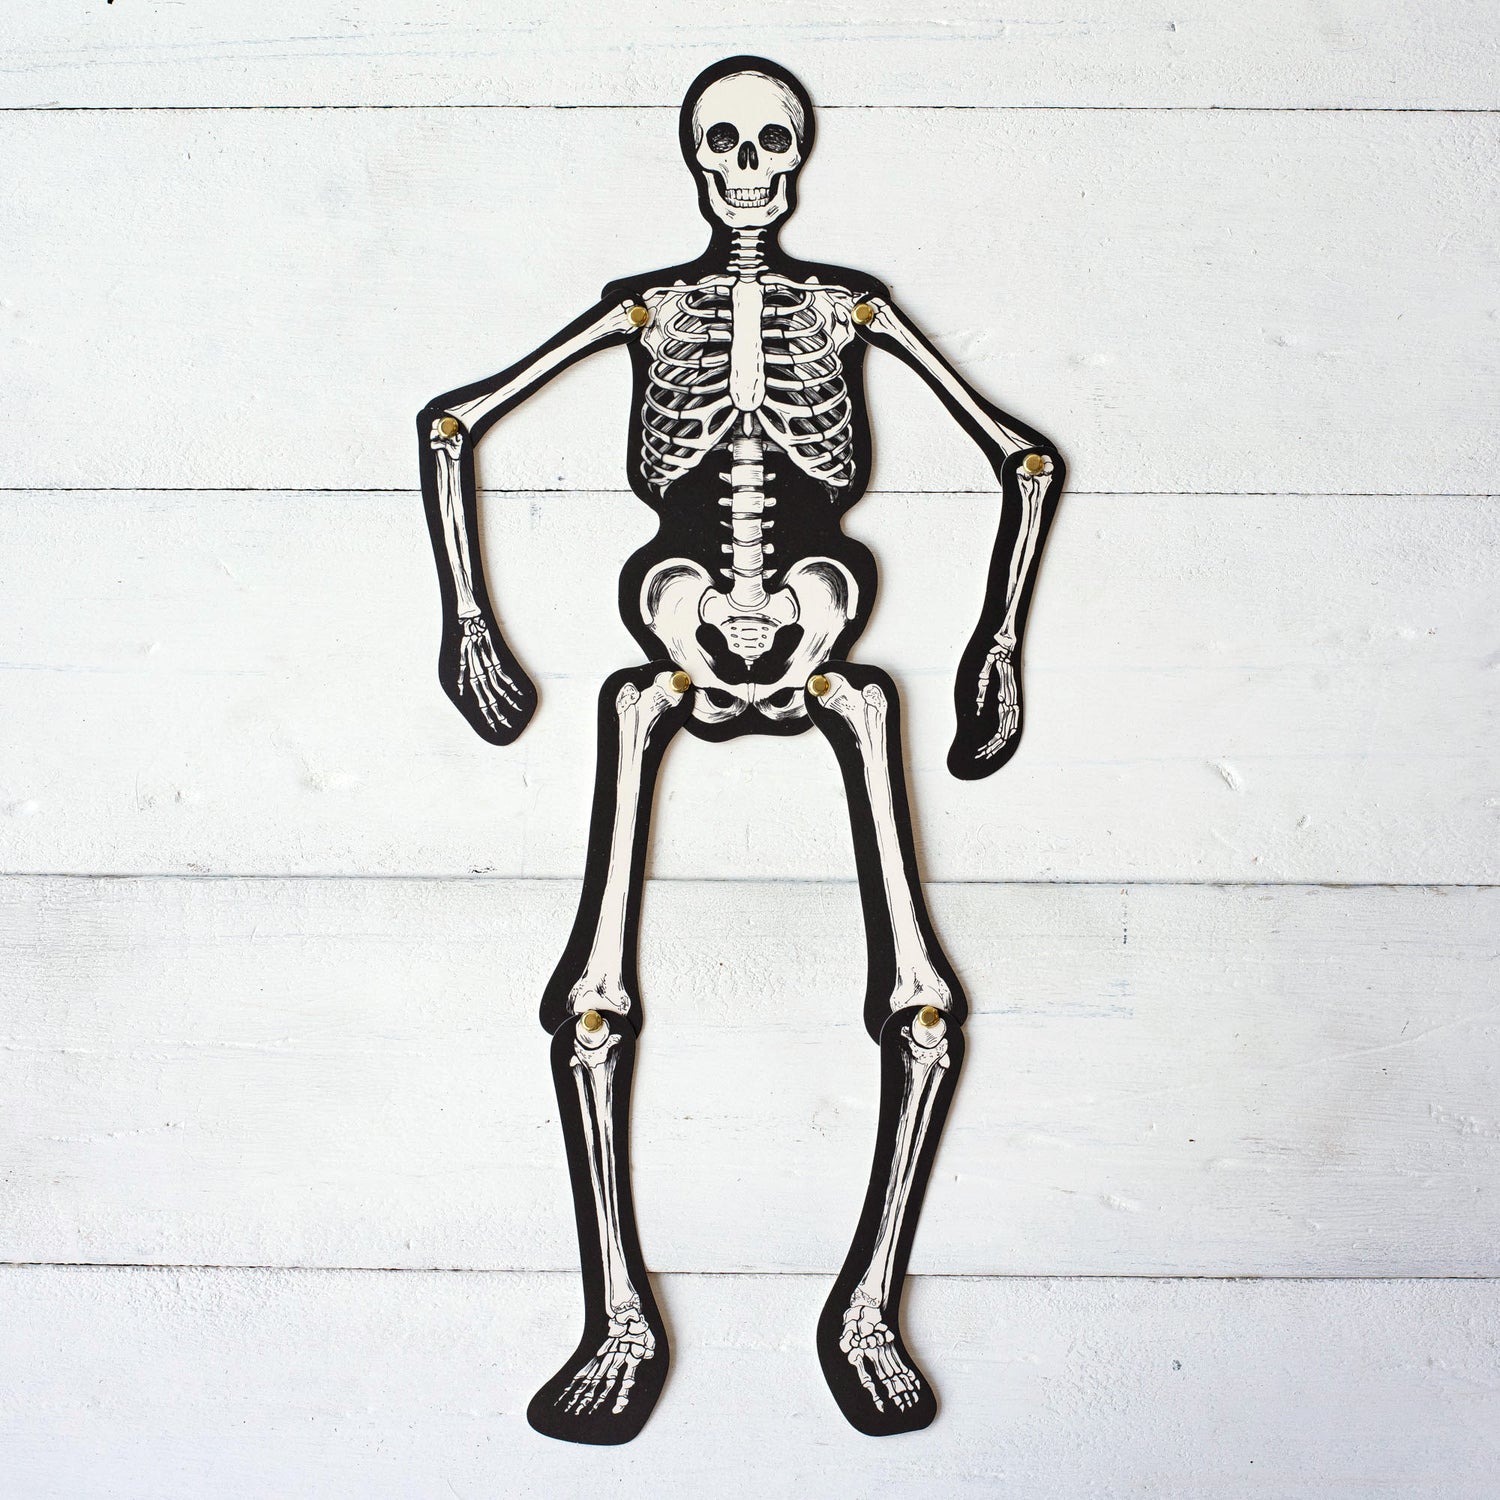 A paper skeleton made of nine die-cut pieces featuring white illustrated bones on a black background, attached together at the shoulder, elbow, hip and knee joints with brass brads.